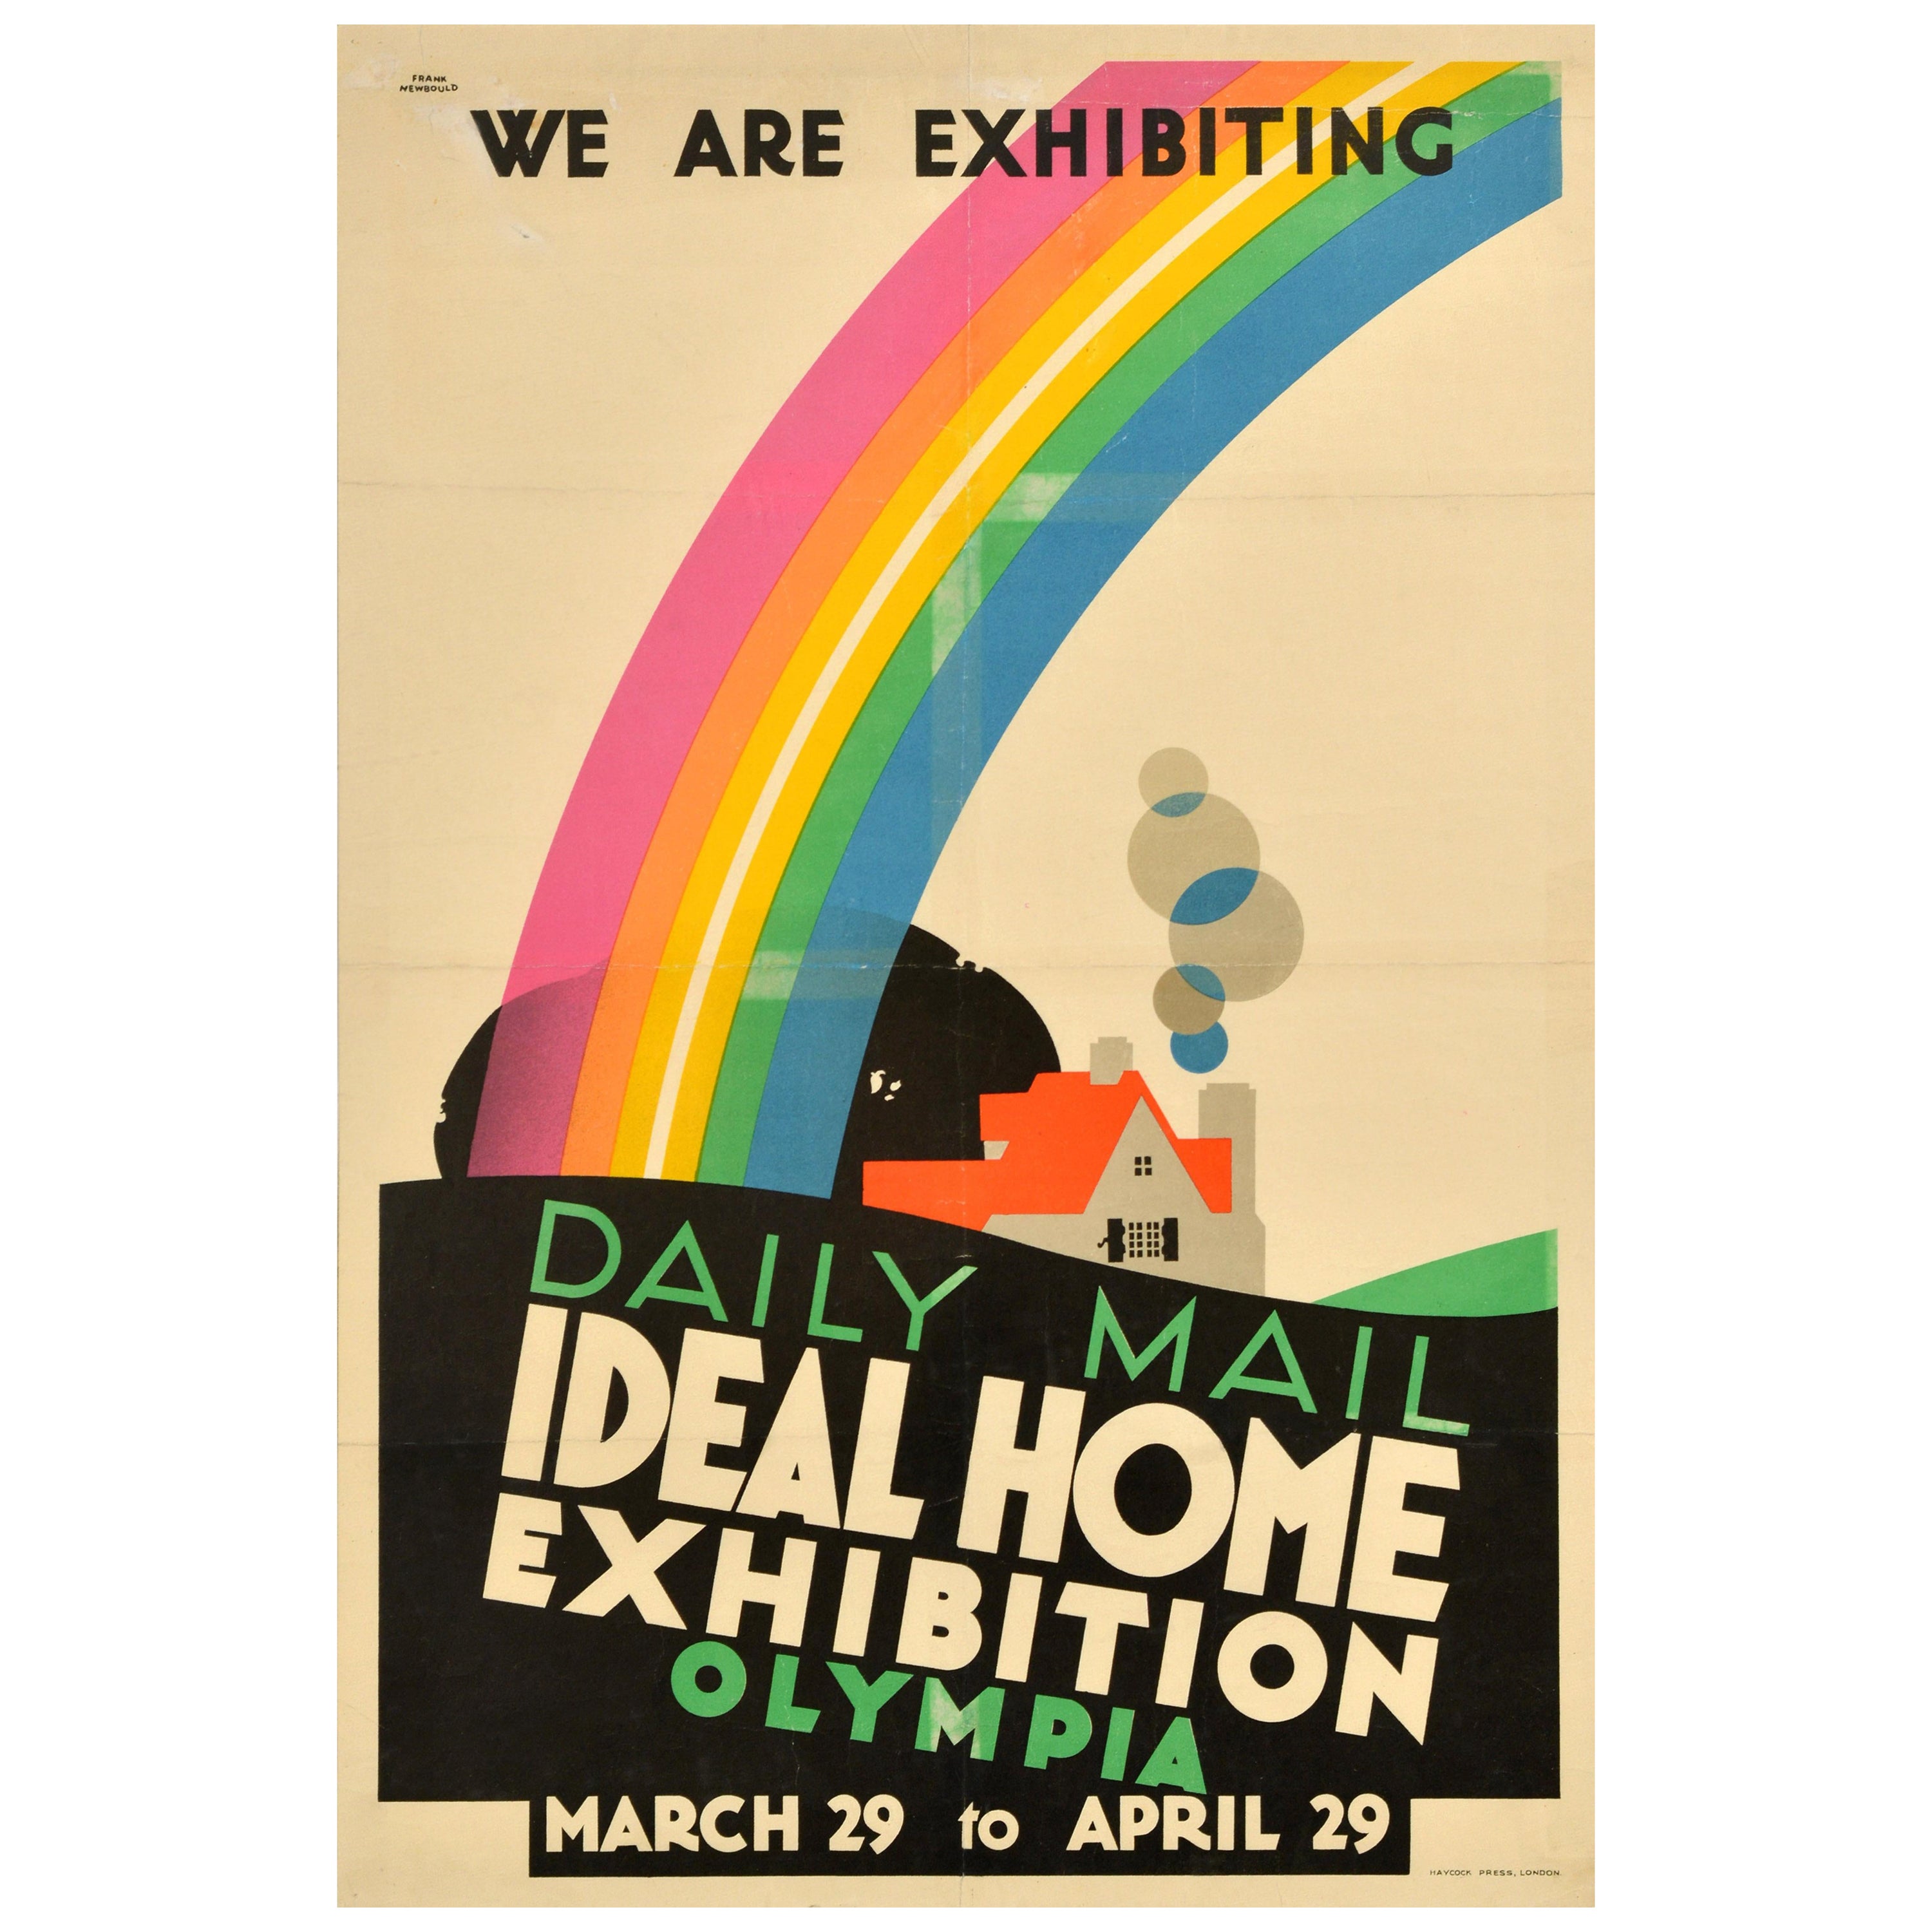 Original Vintage Advertising Poster Ideal Home Exhibition Daily Mail Olympia